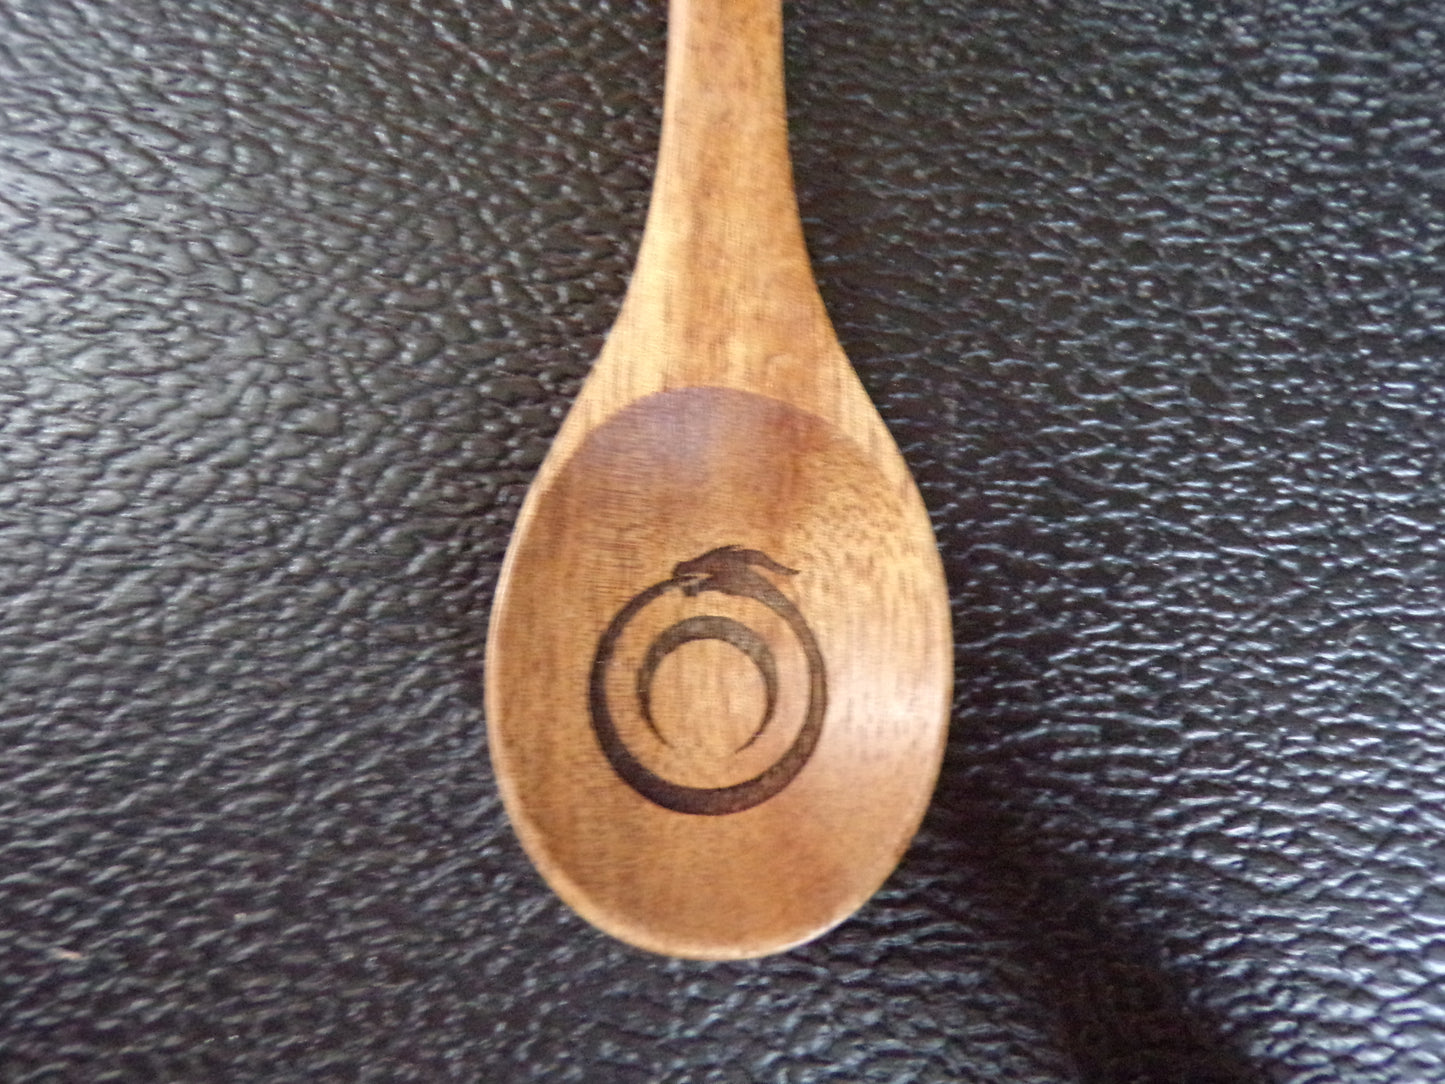 Styx Acacia wood spoon with a Rose and Ouroboros